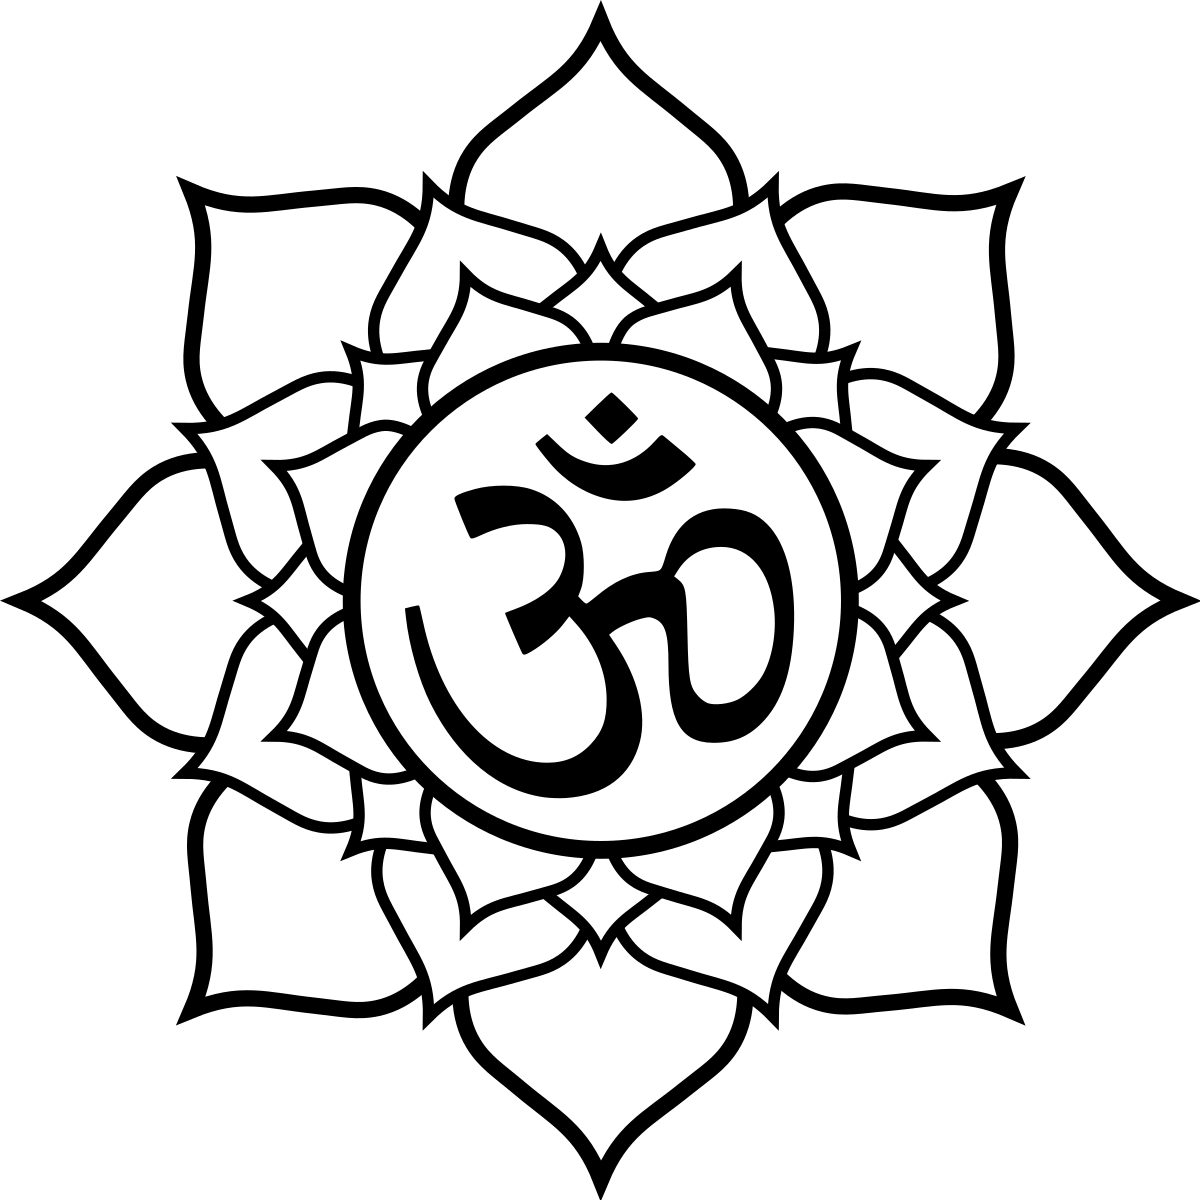 Download File Lotus Aum Svg Wikimedia Commons